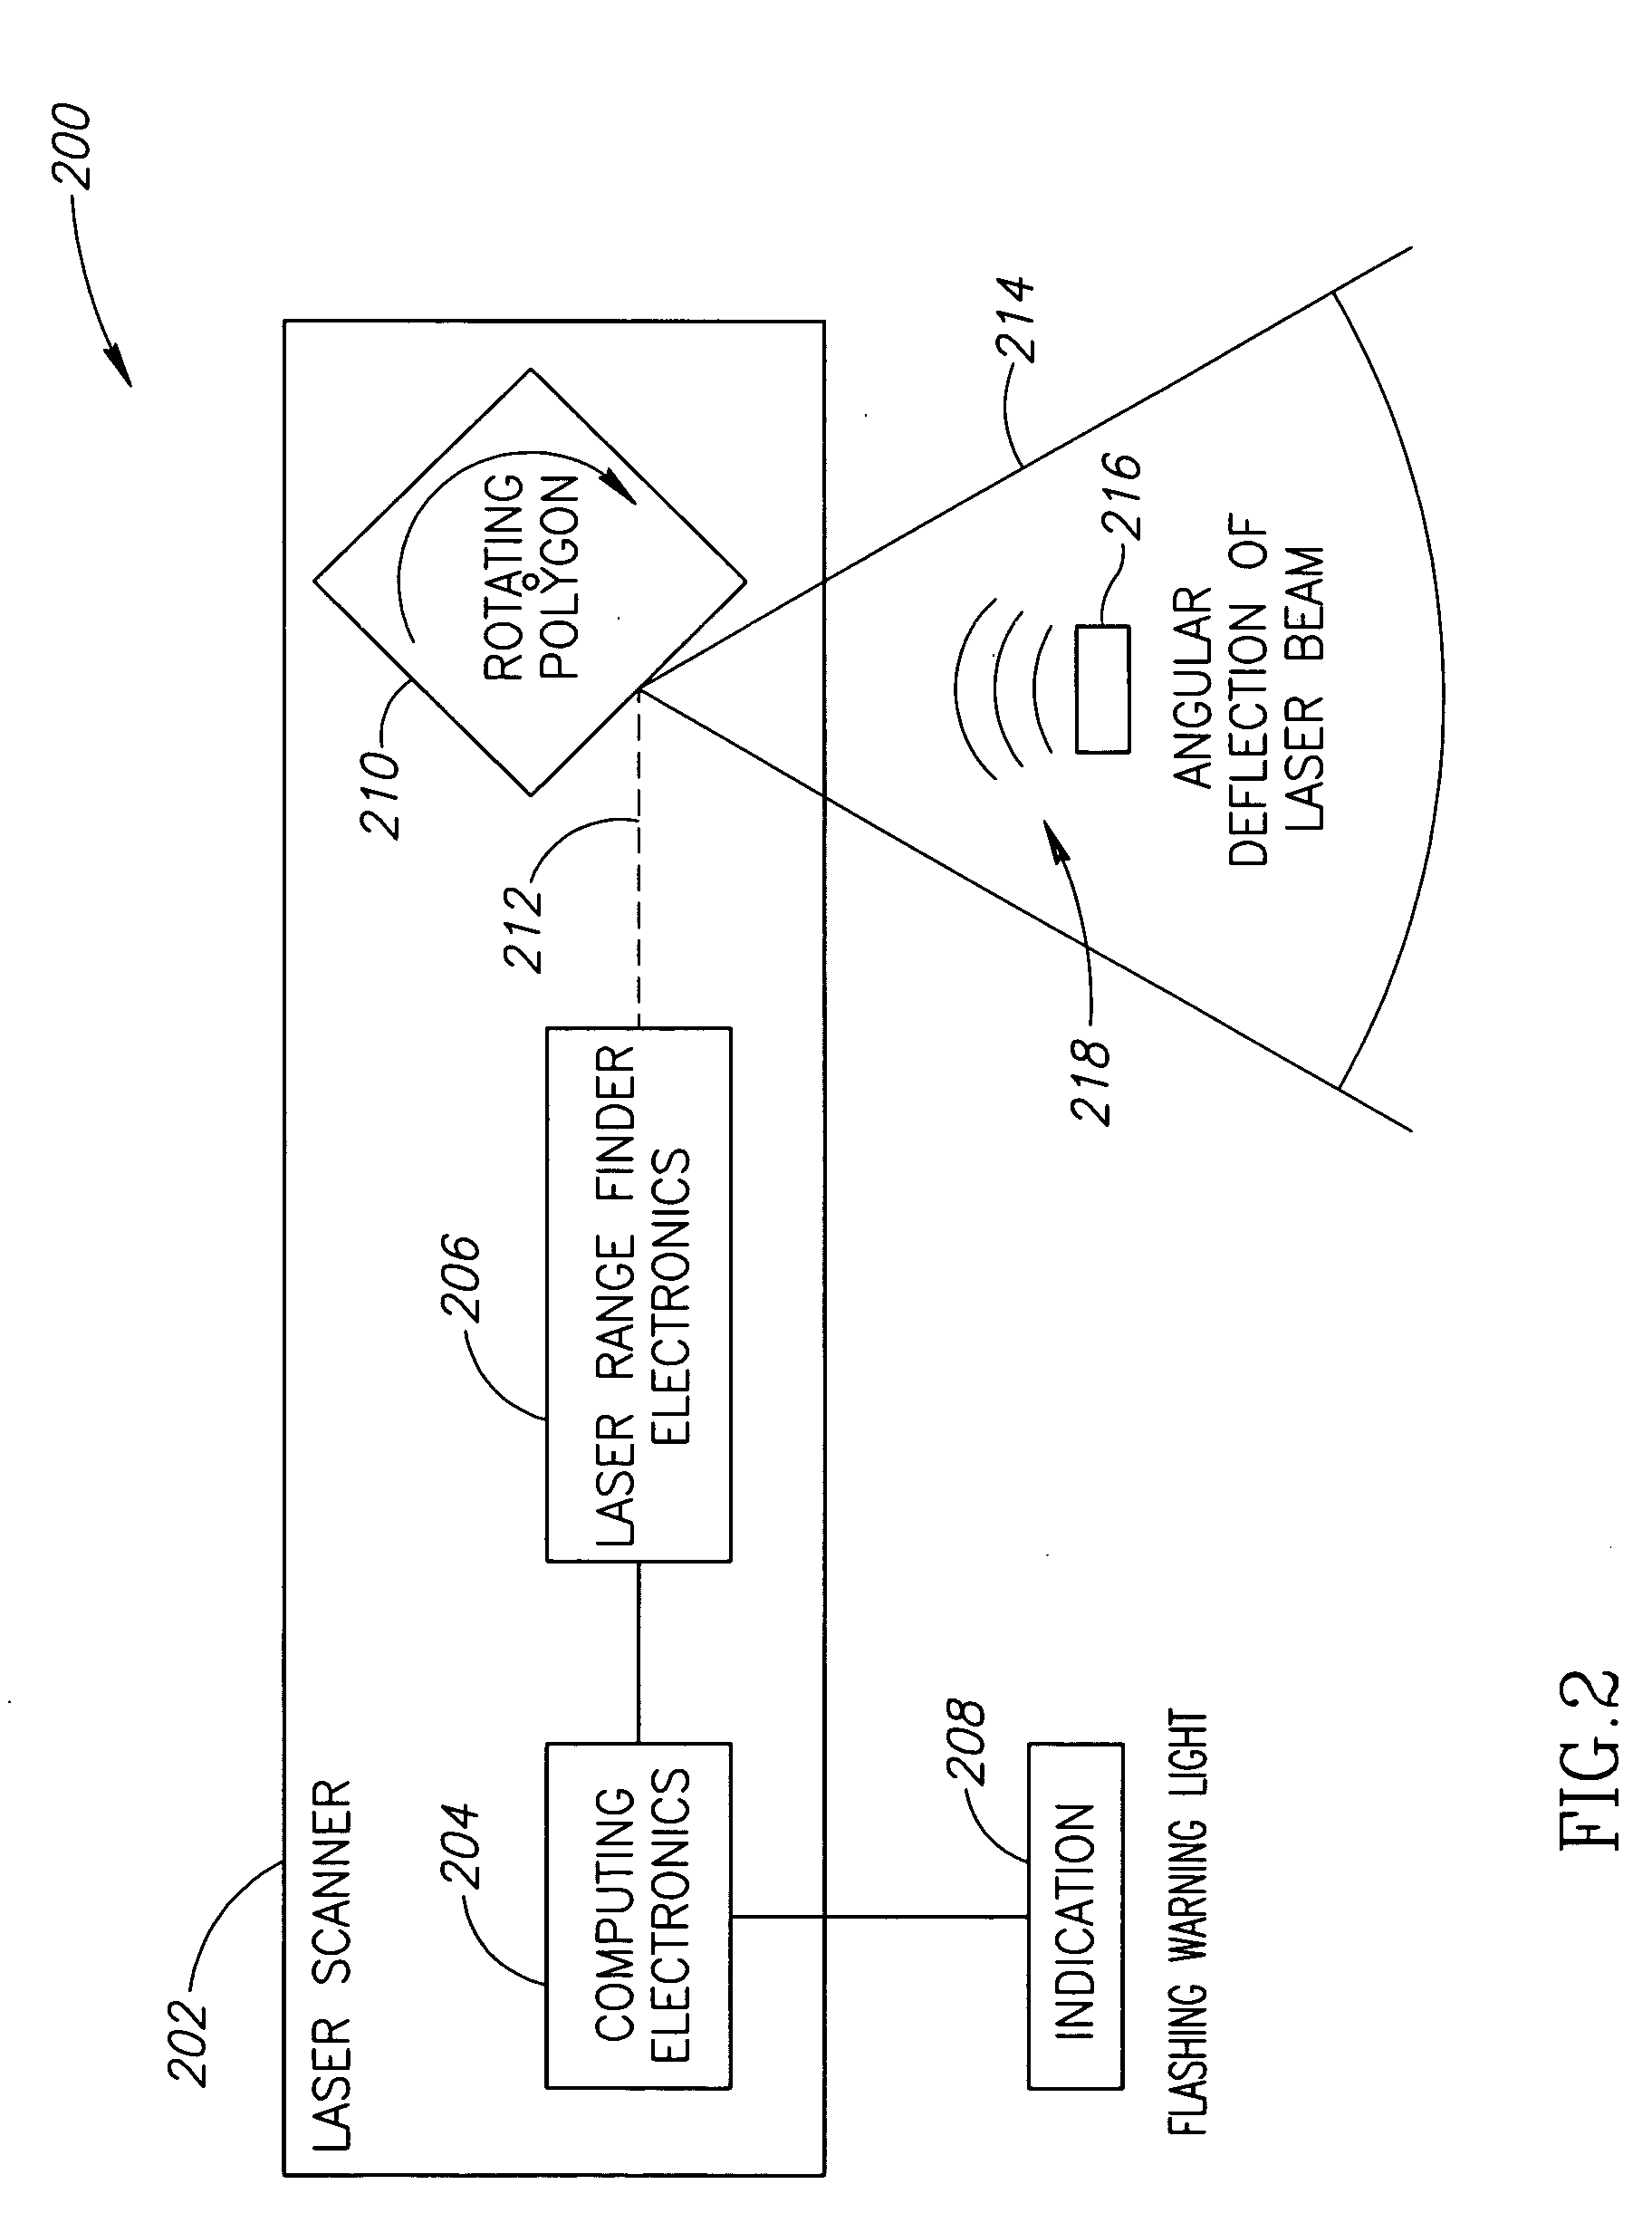 Systems and methods for collision avoidance